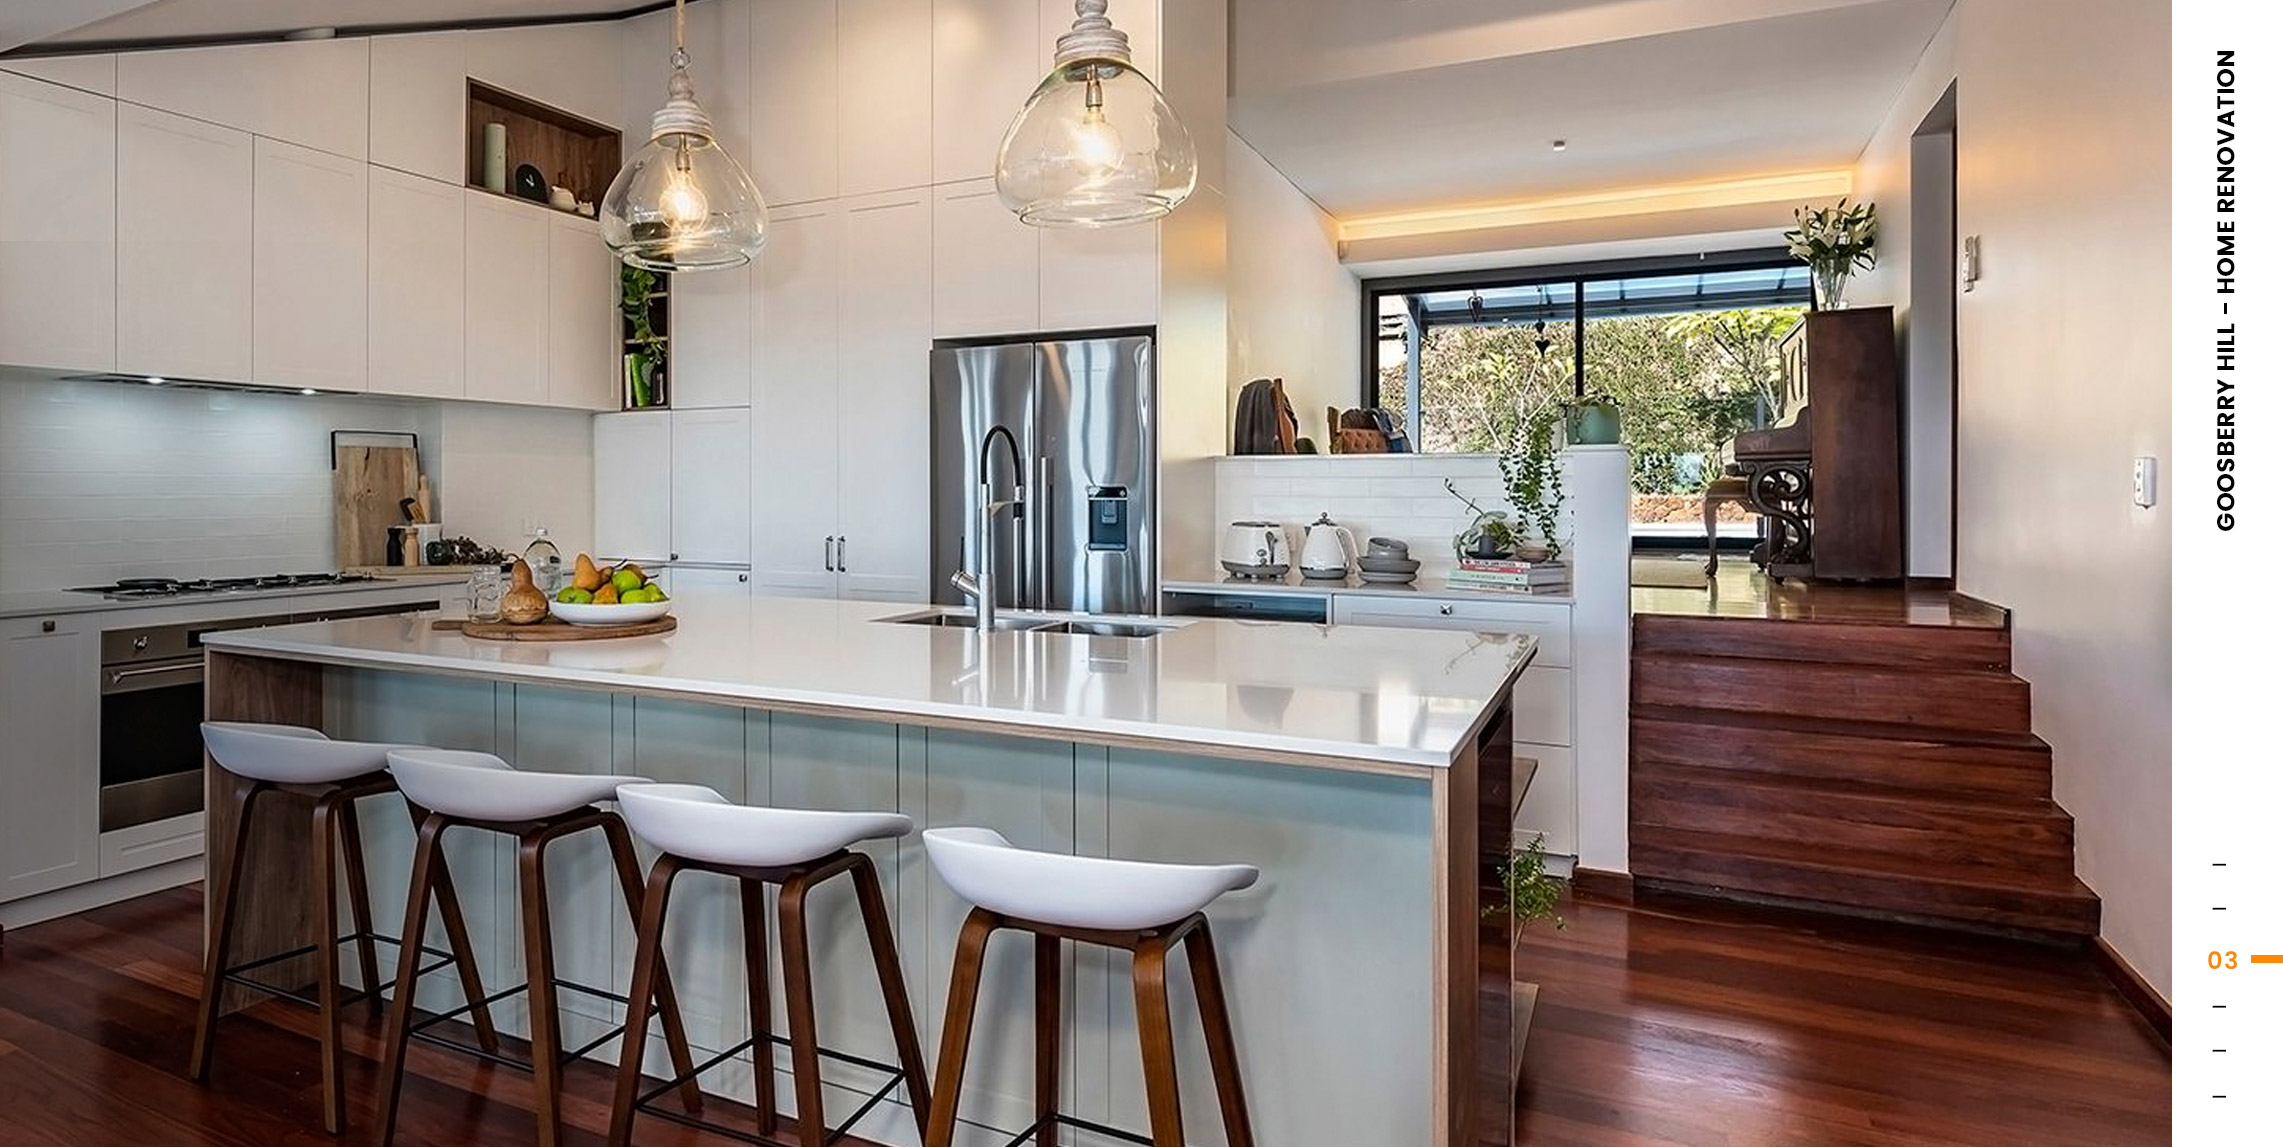 Goosberry Hill kitchen design and specification